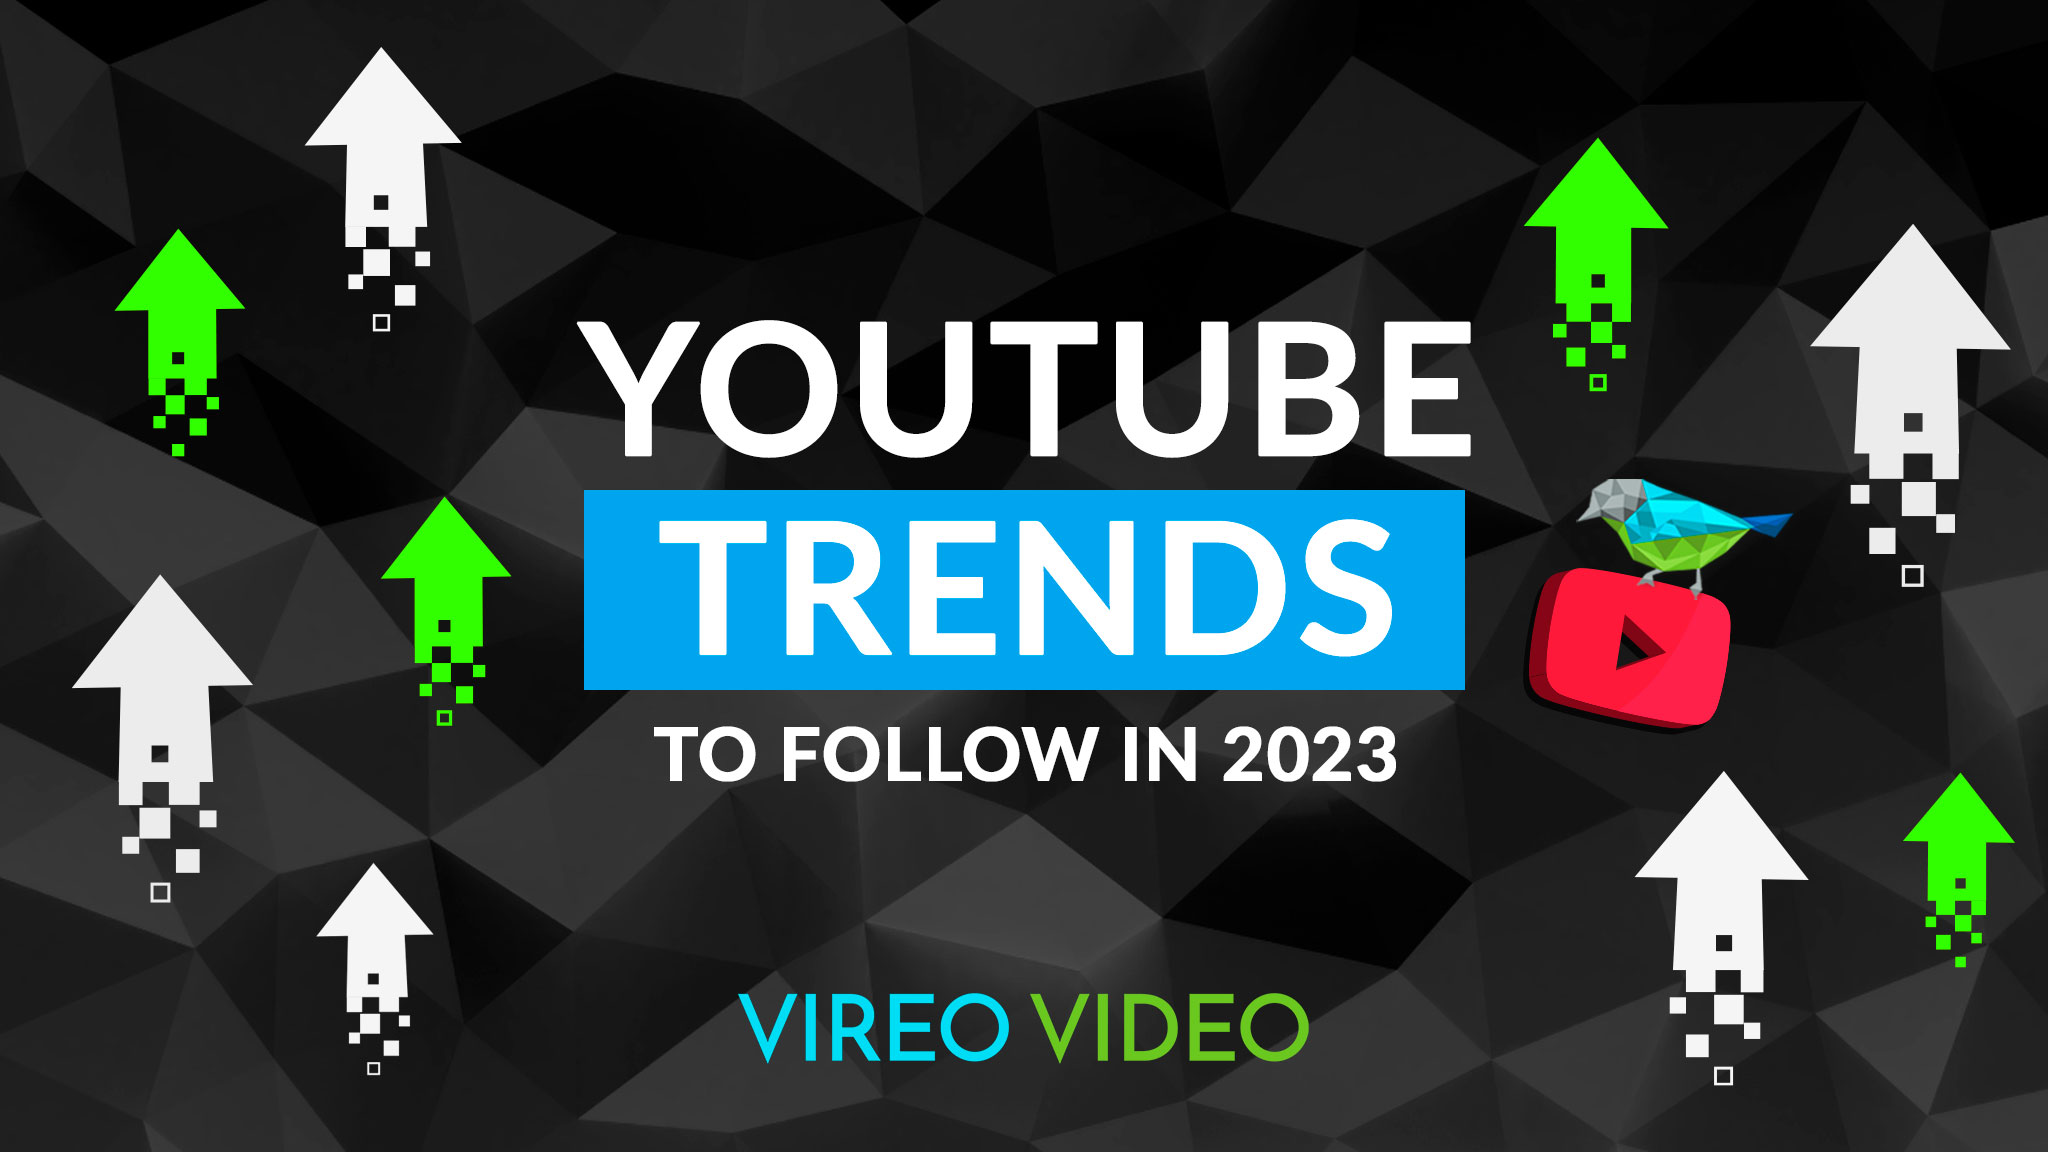 Top YouTube Trends in 2023 YouTube Forecast by Vireo Video